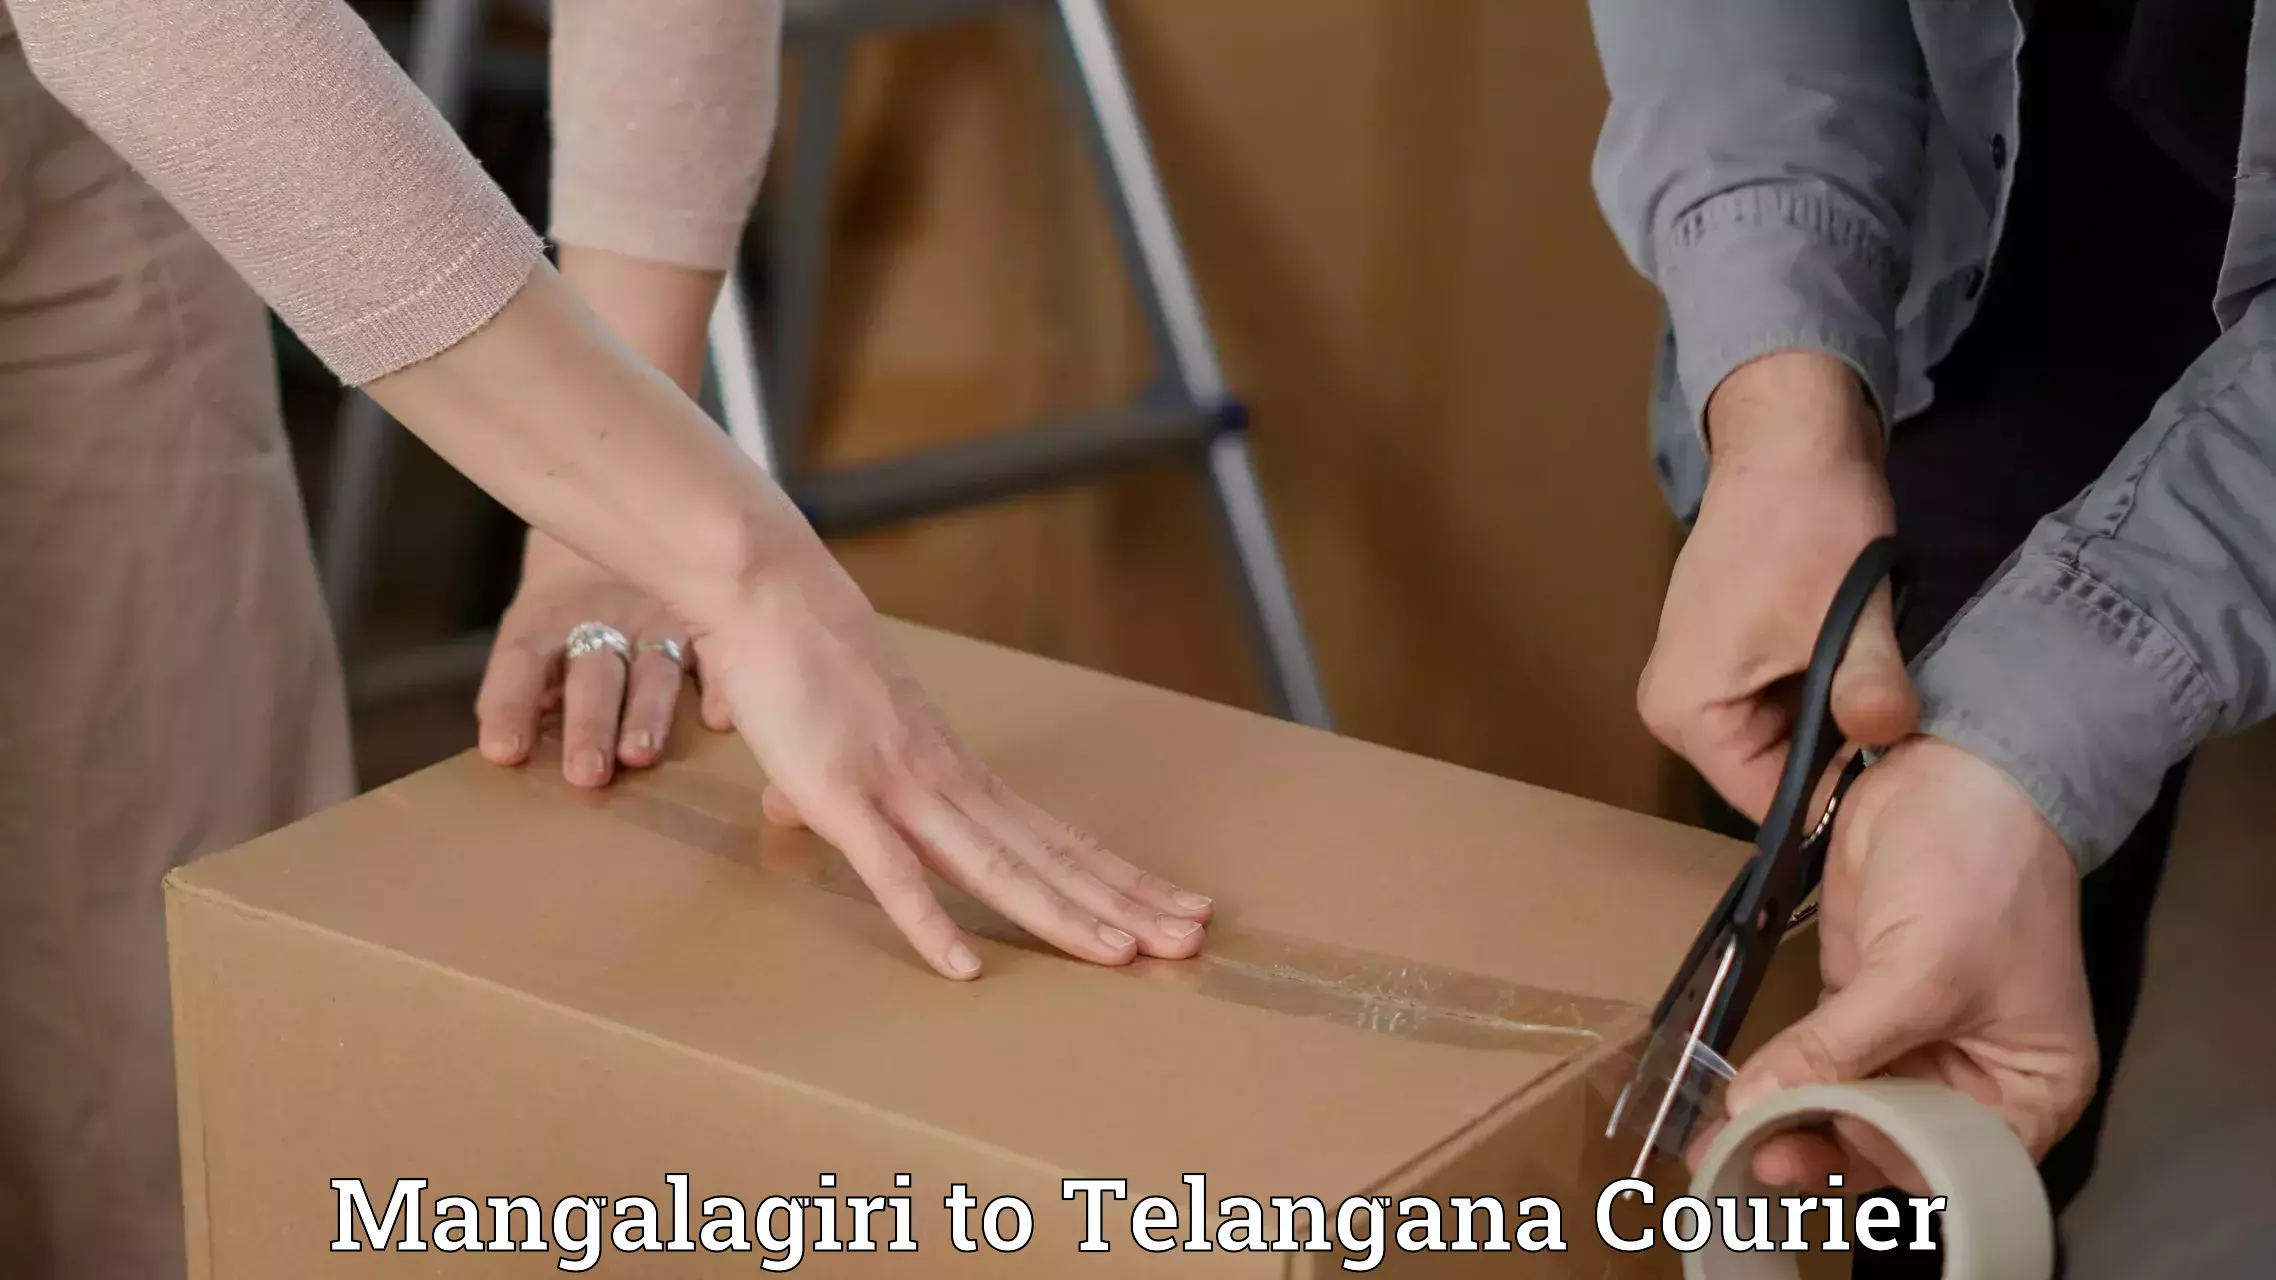 Courier service booking Mangalagiri to Sathupally